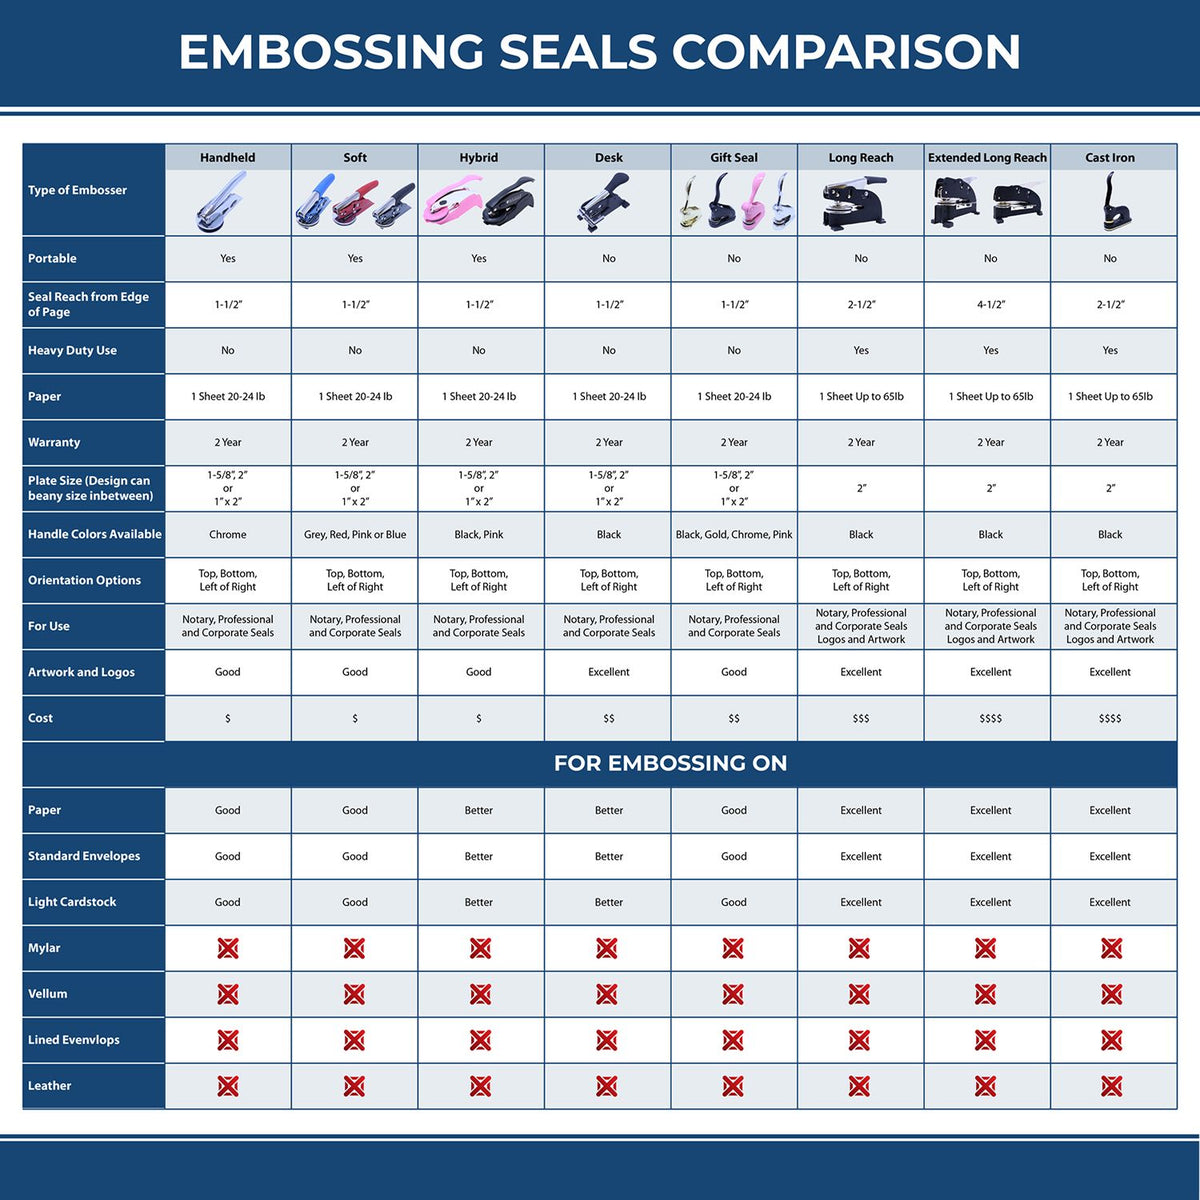 A comparison chart for the different types of mount models available for the Minnesota Desk Surveyor Seal Embosser.